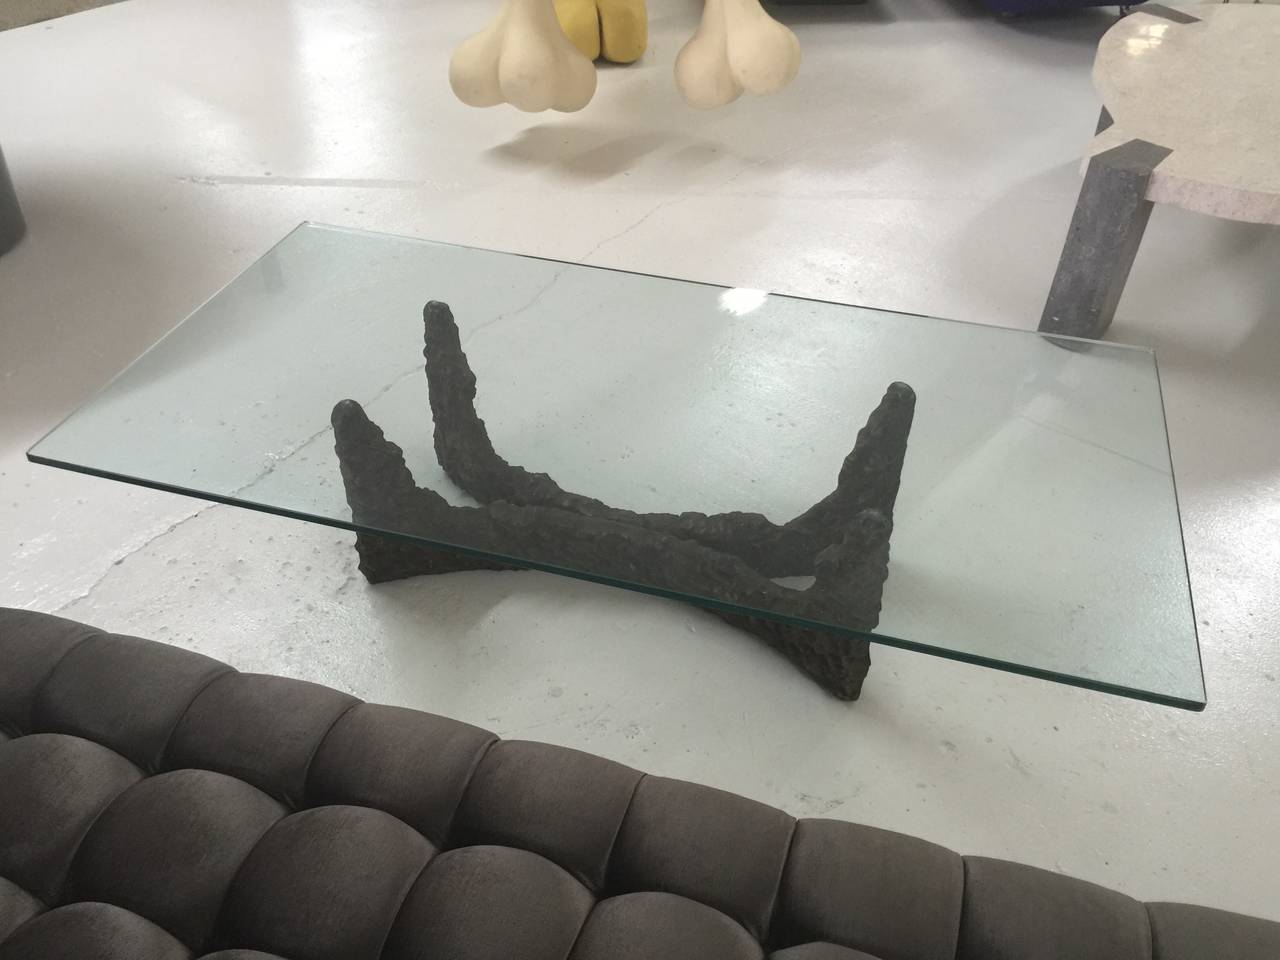 1970s coffee table by Paul Evans
with sculptural bronze cast base
and rectangular large thick glass top.
On display at ENTREPOT,Miami.
By appointment only.